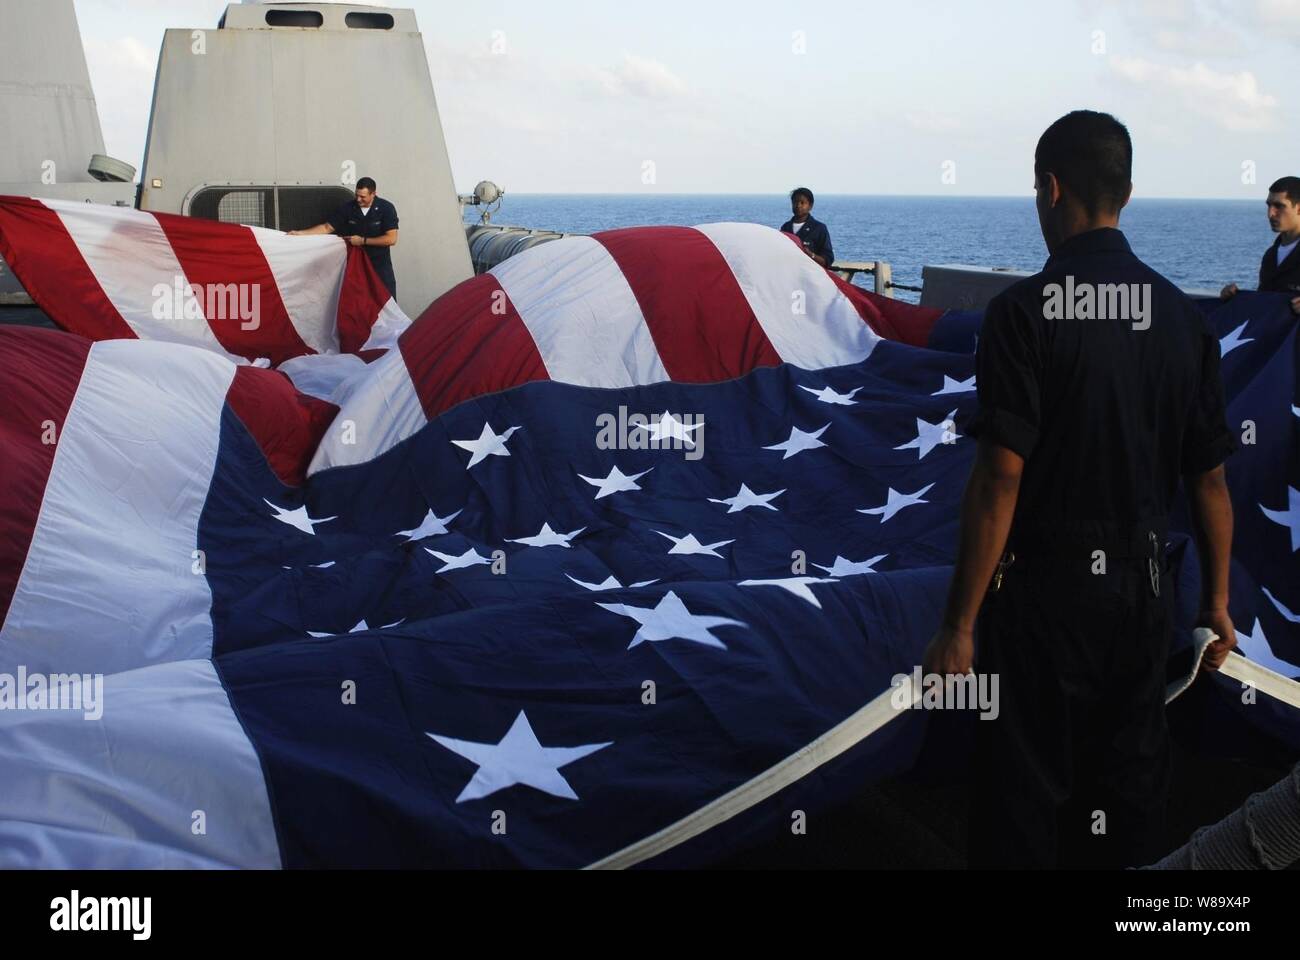 U.S. Navy sailors aboard the amphibious transport dock ship USS San Antonio (LPD 17) fold a 30-foot by 60-foot American flag while in the Gulf of Aden on Jan. 12, 2009.  The San Antonio is the command ship for Combined Task Force 151.  Combined Task Force 151 is a multi-national task force conducting counter-piracy operations in and around the Gulf of Aden, Arabian Sea, Indian Ocean and Red Sea.  It was established to create a lawful maritime order and develop security in the maritime environment. Stock Photo